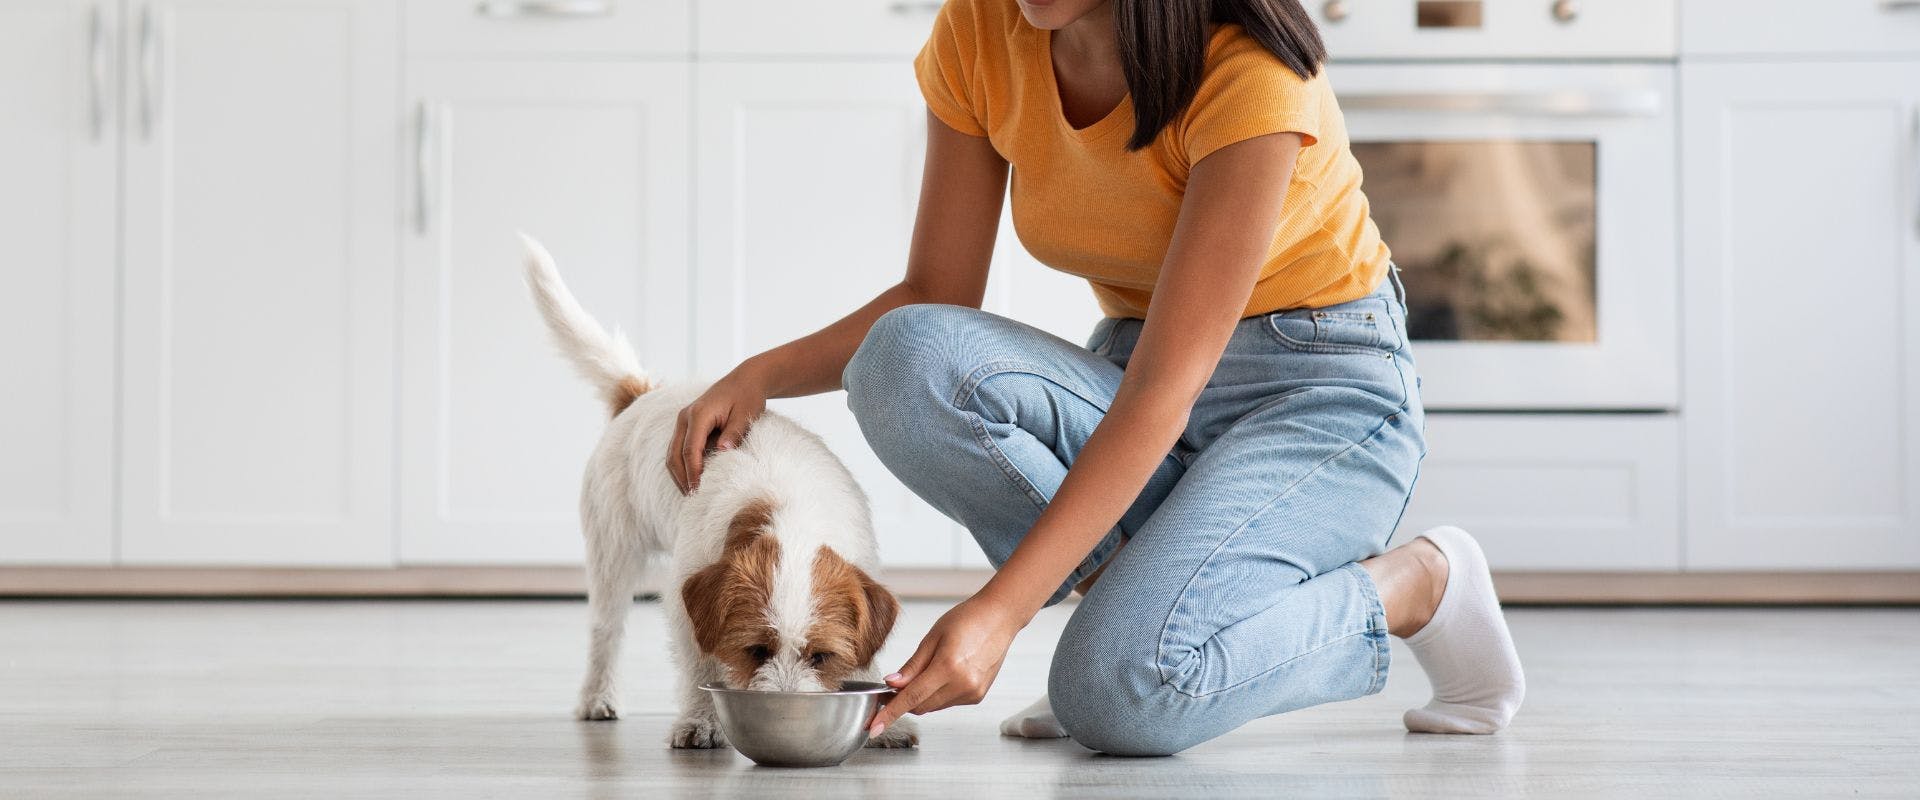 Person feeding Jack Russell from metal bowl